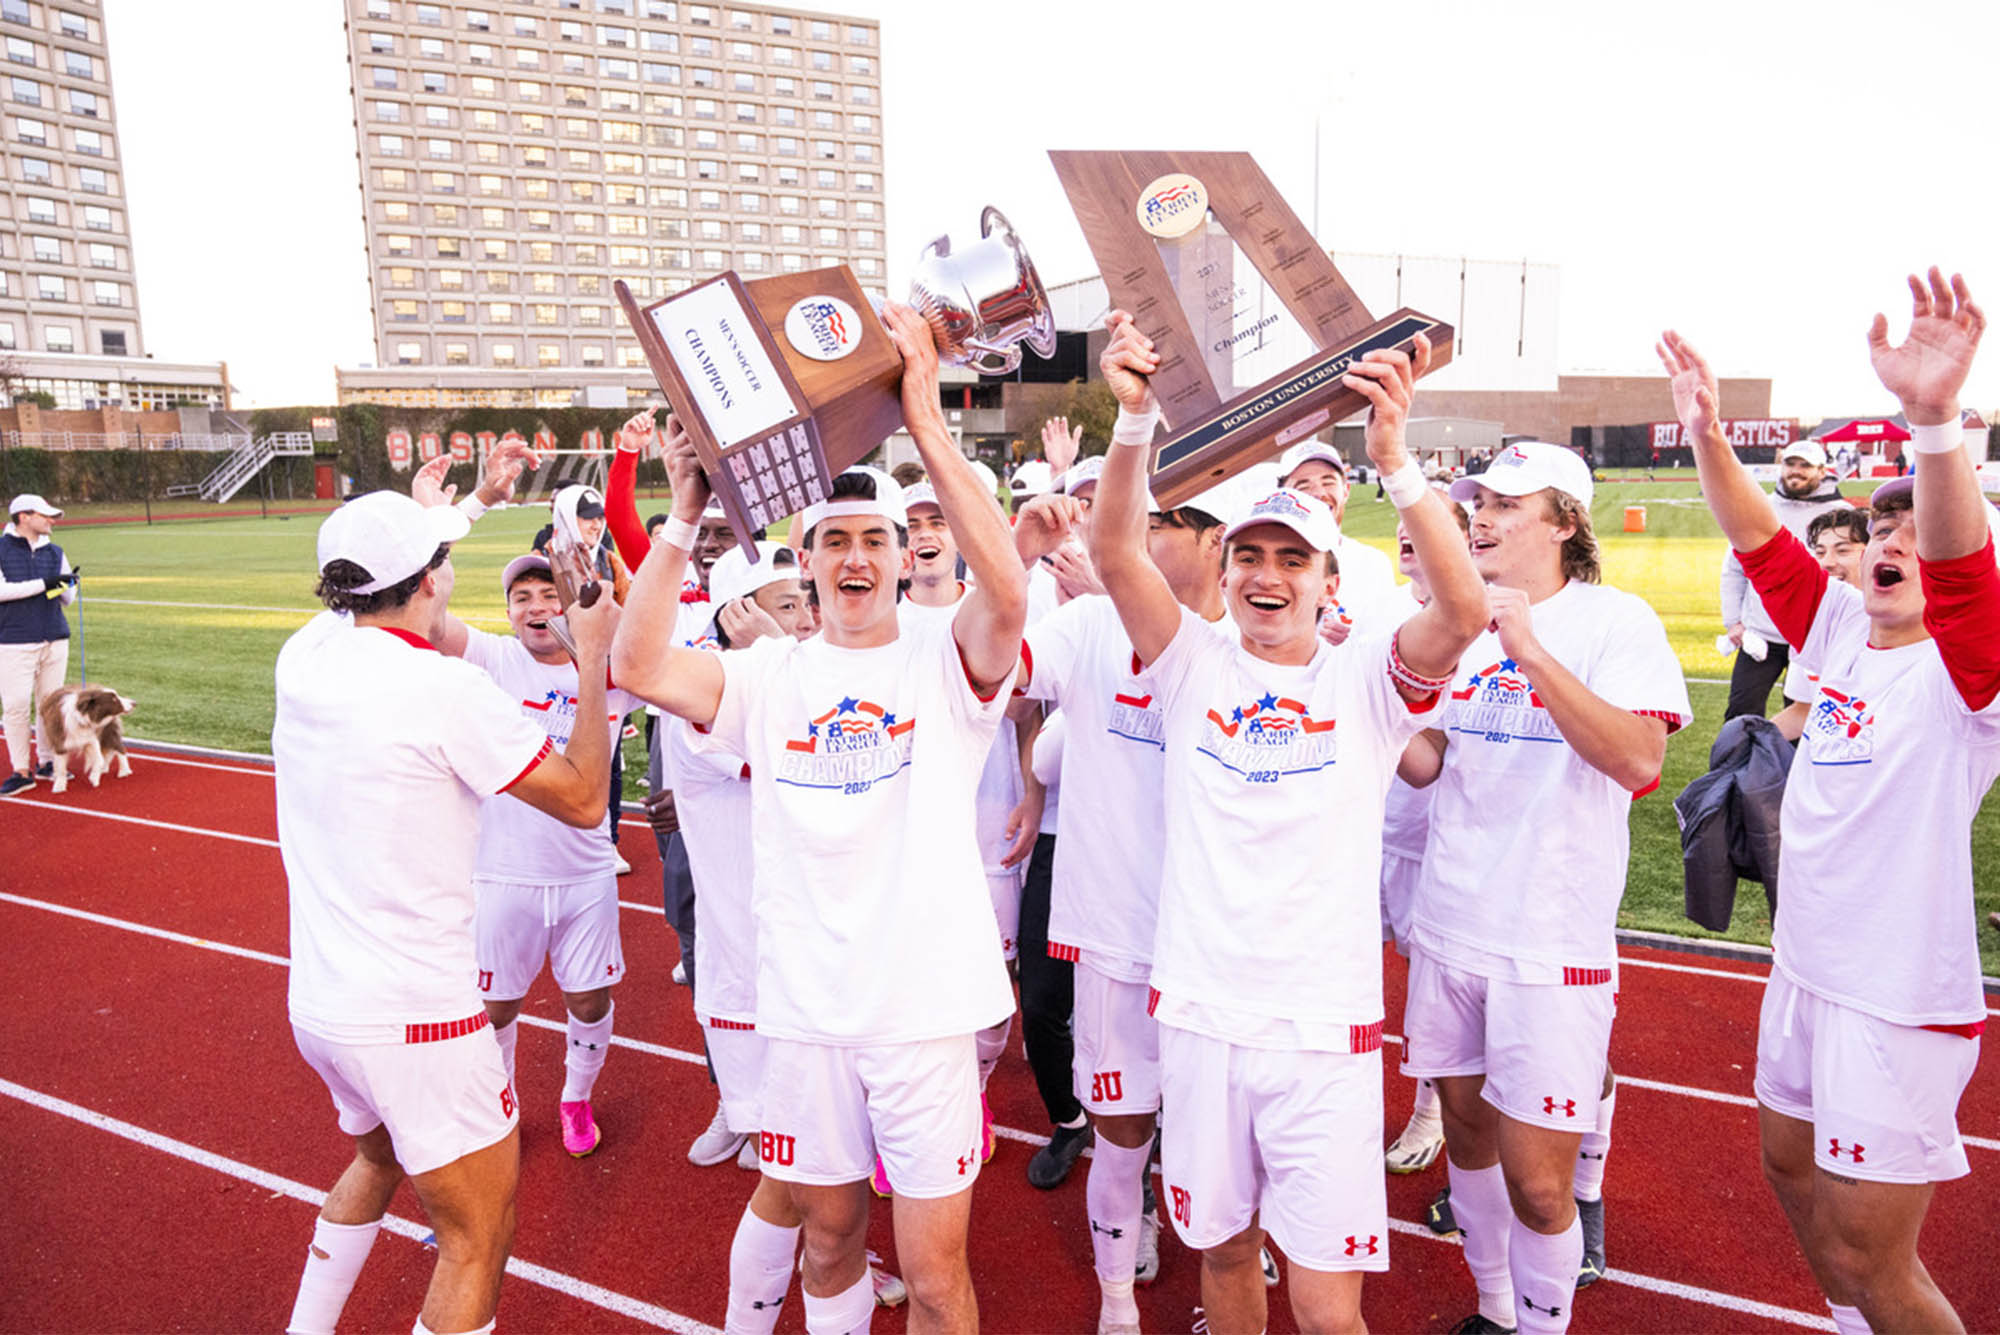 Photo: BU Men's soccer players raise the Patriot League trophy after a large win. Players are wearing white jerseys and standing on a soccer field